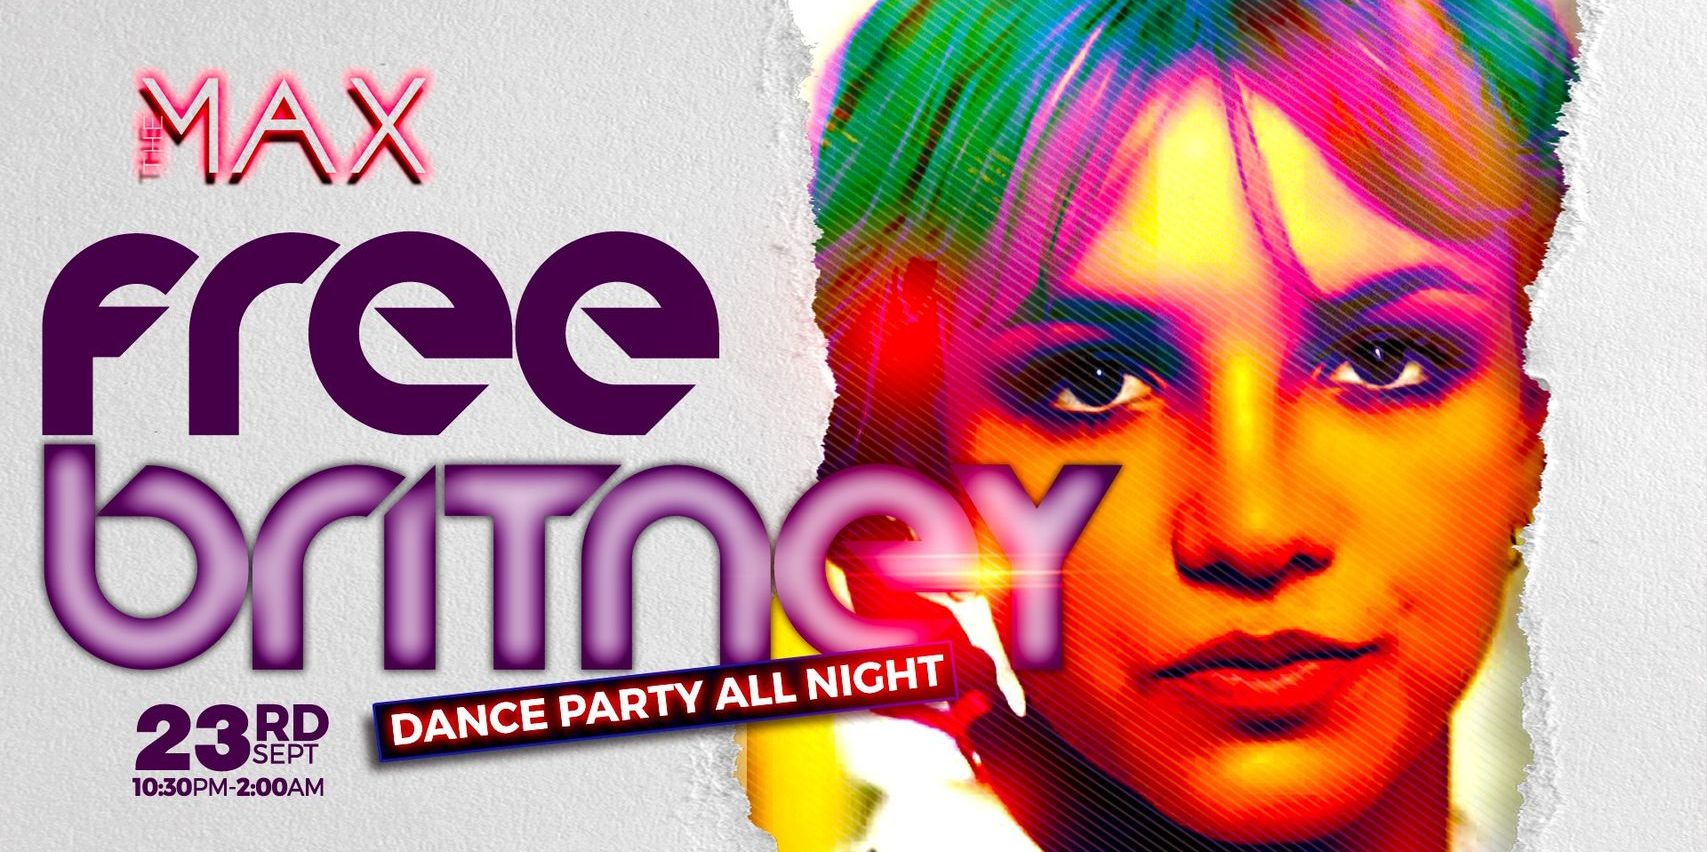 Free Britney! Dance Party promotional image